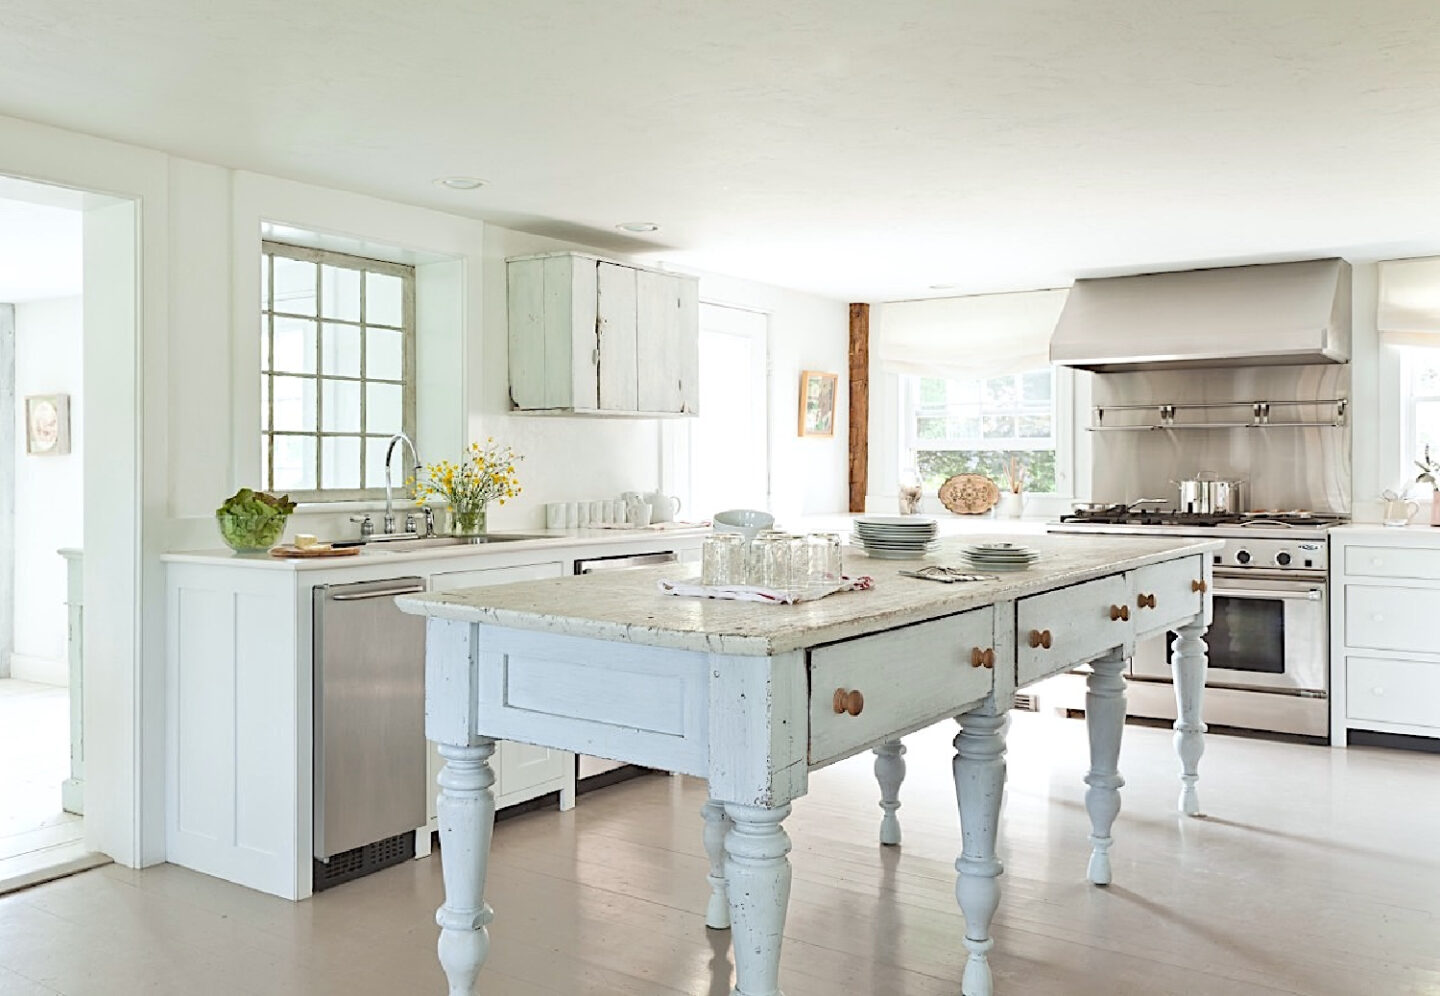 Rustic romantic white kitchen styled by Fifi O'Neill for SHADES OF WHITE. Mark Lohman photo.